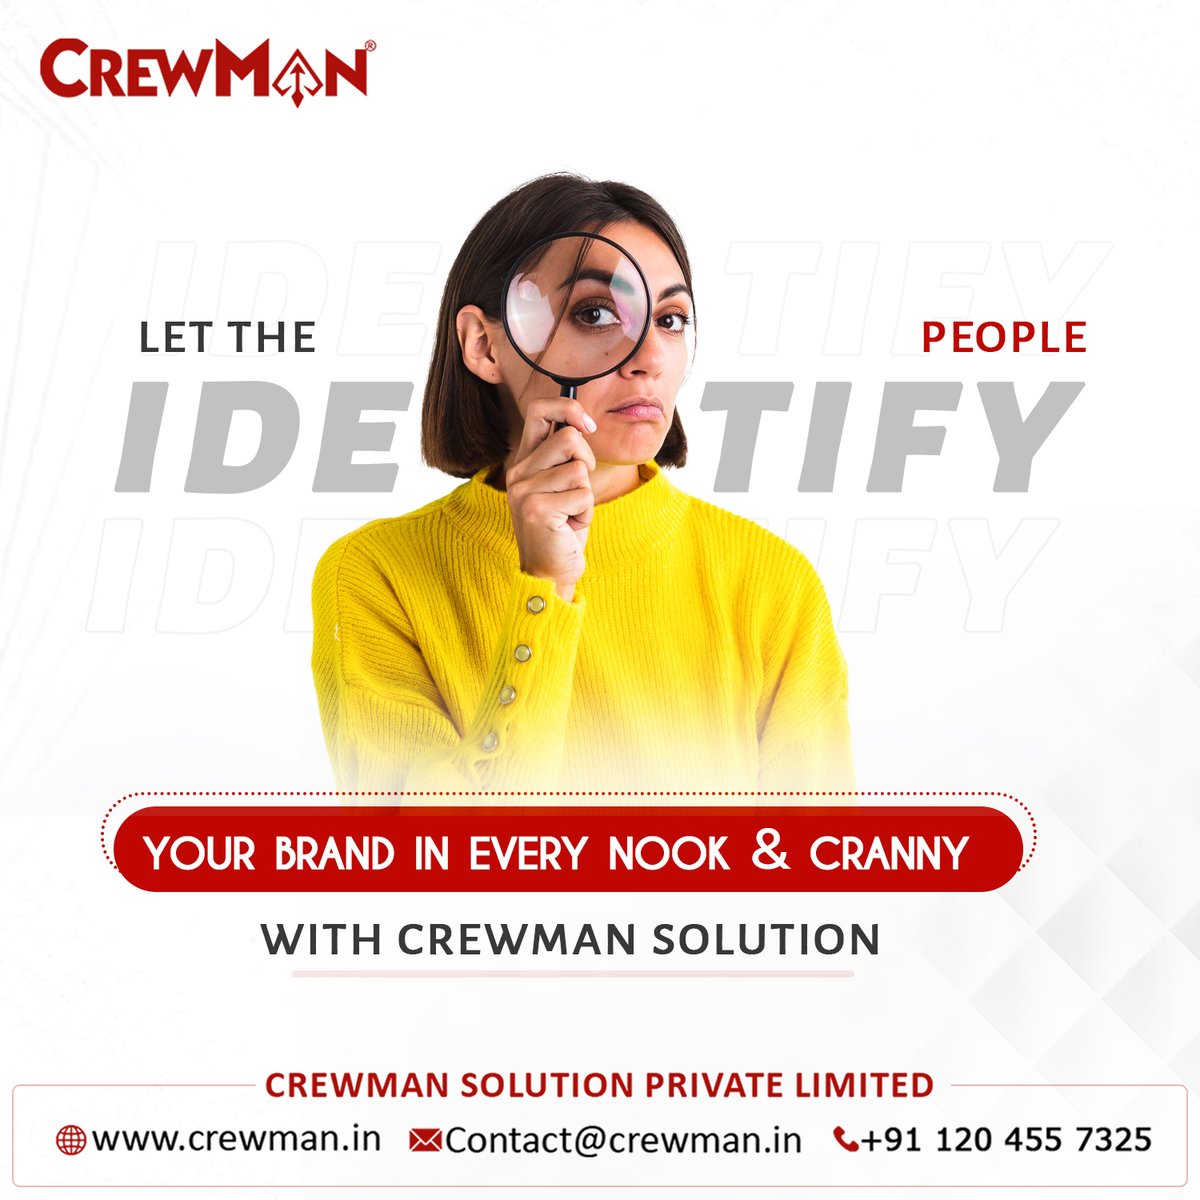 Stand out from the crowd with Crewman Solutions. Let your brand shine everywhere.
Contact us for Free Consultation :- 9529076777
#brand #brandpromotion #supportsmallbussines #crewmansolution #promotionalert #brandgrowth #brandidenity #BrandNew #branding #brandingagency #services